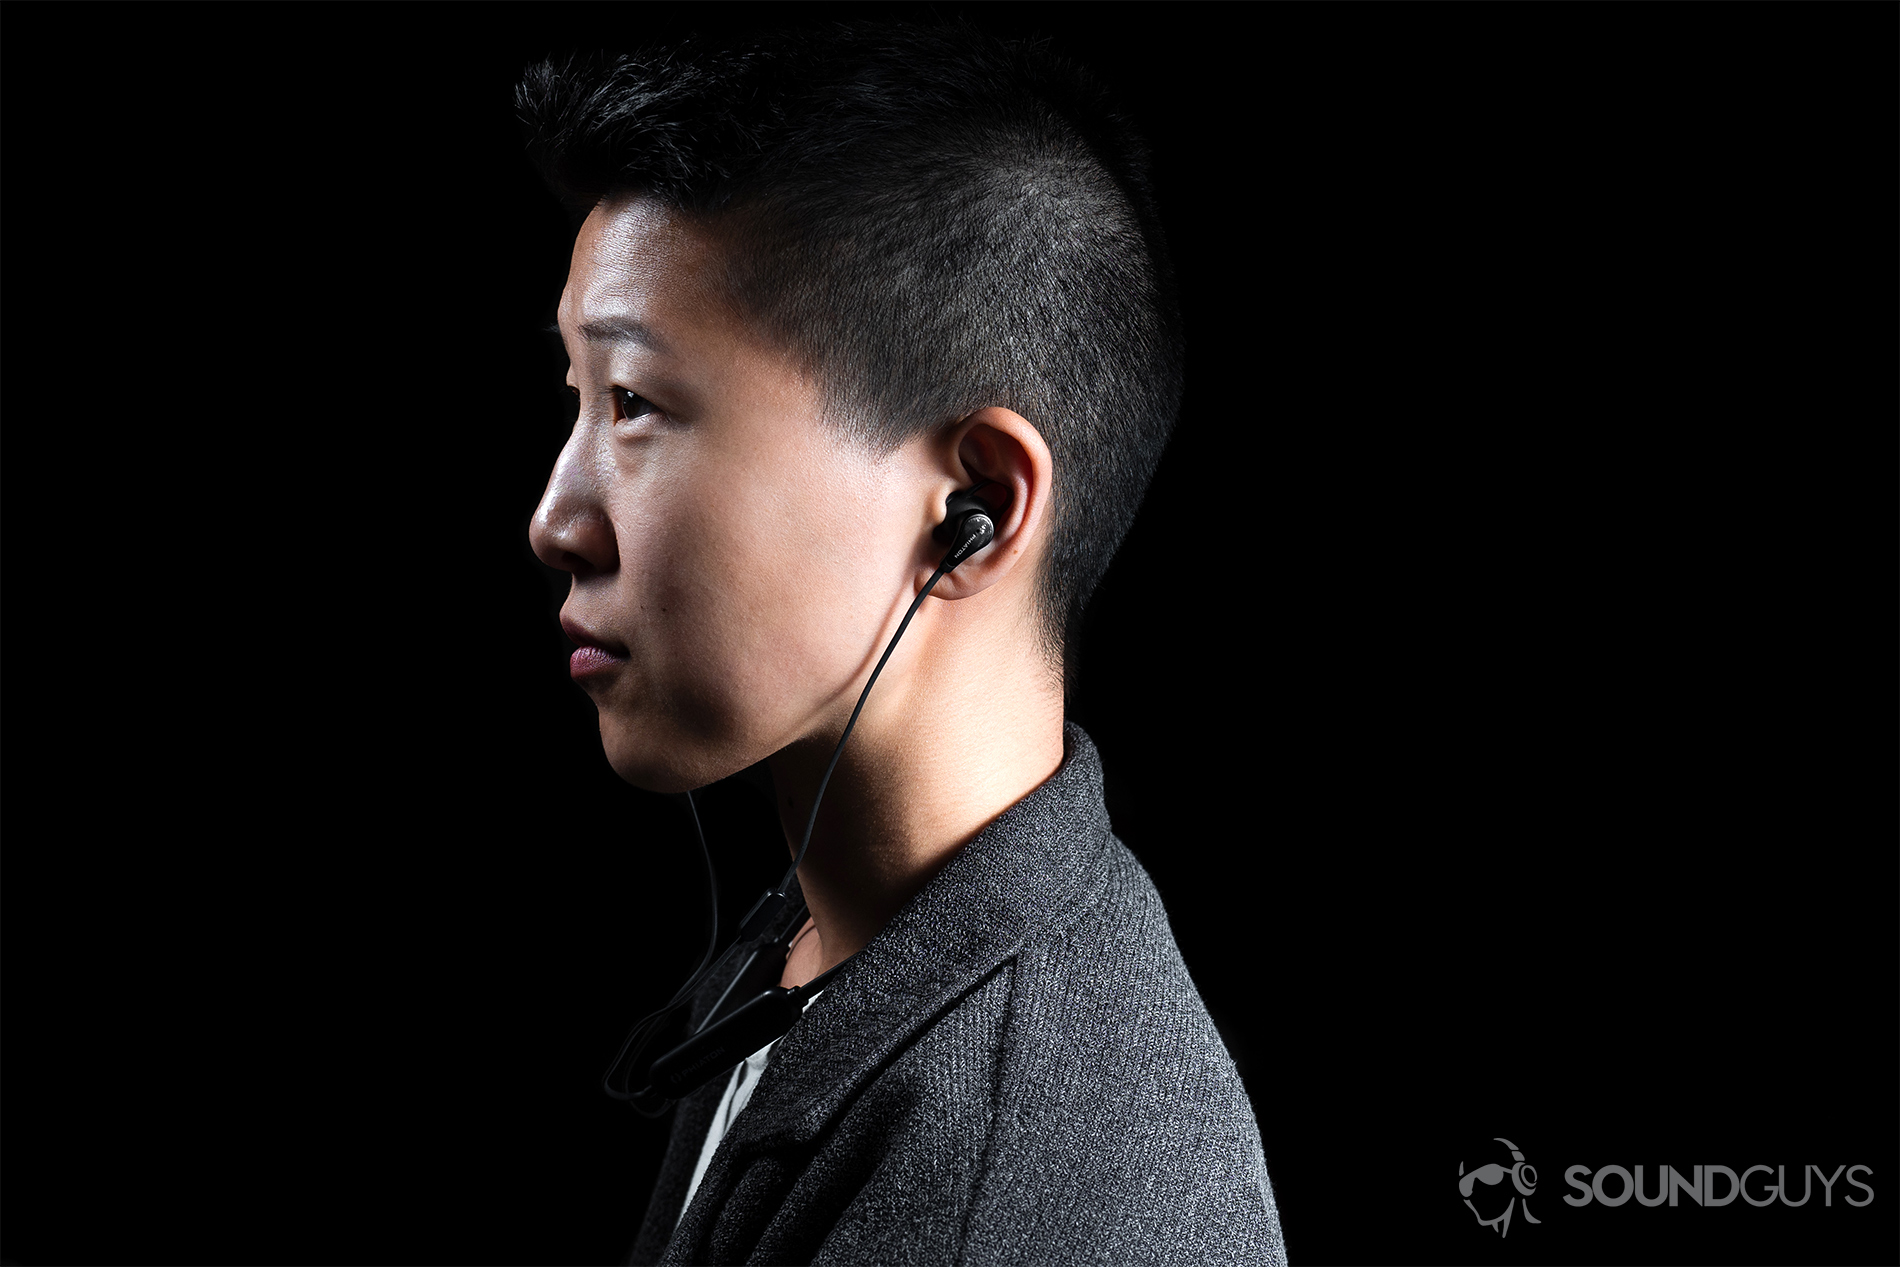 Phiaton Curve BT 120 NC: The profile of a woman wearing the earbuds.